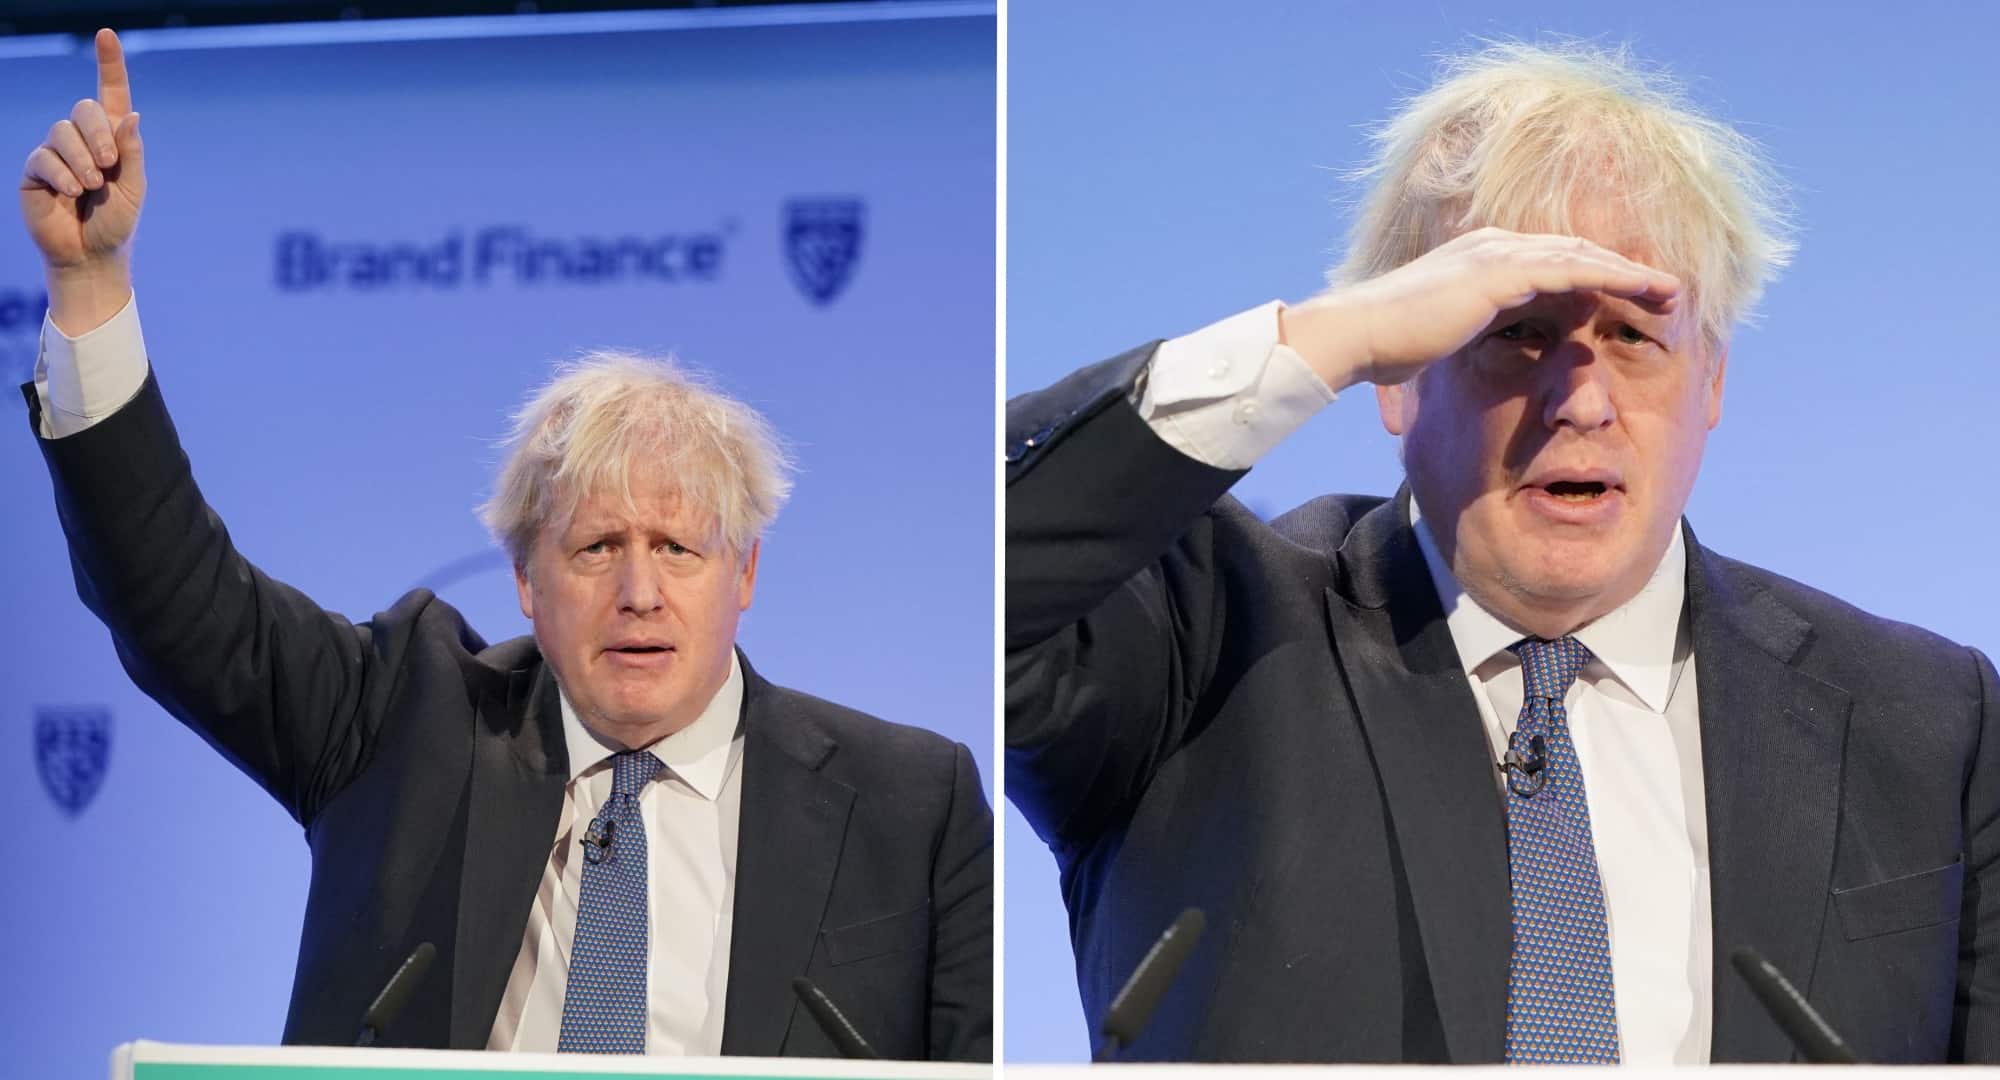 Watch: Boris asks crowd if ‘Brexit was a good idea’ – only one hand goes up